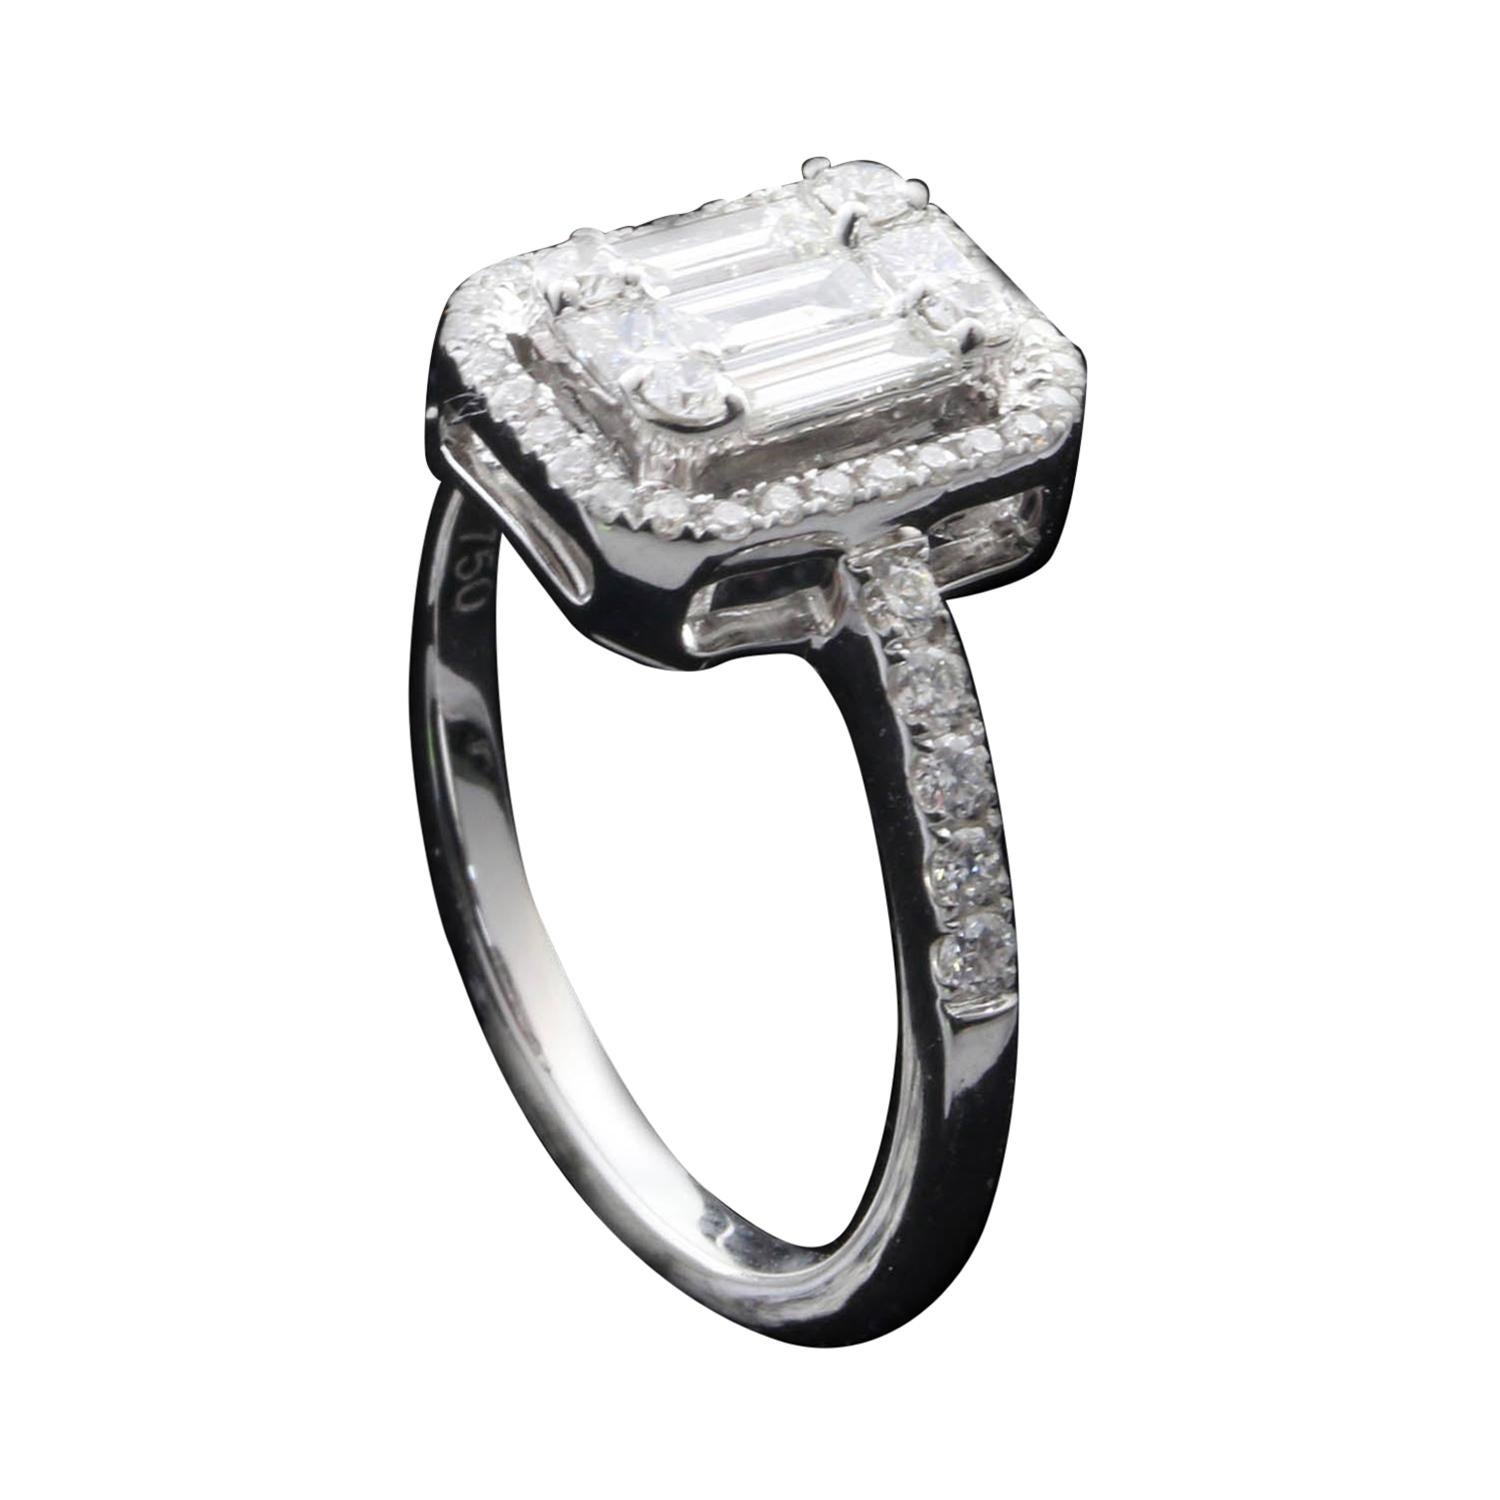 For Sale:  2ct Emerald Cut Diamond Illusion Engagement Ring Set in 18kt Gold